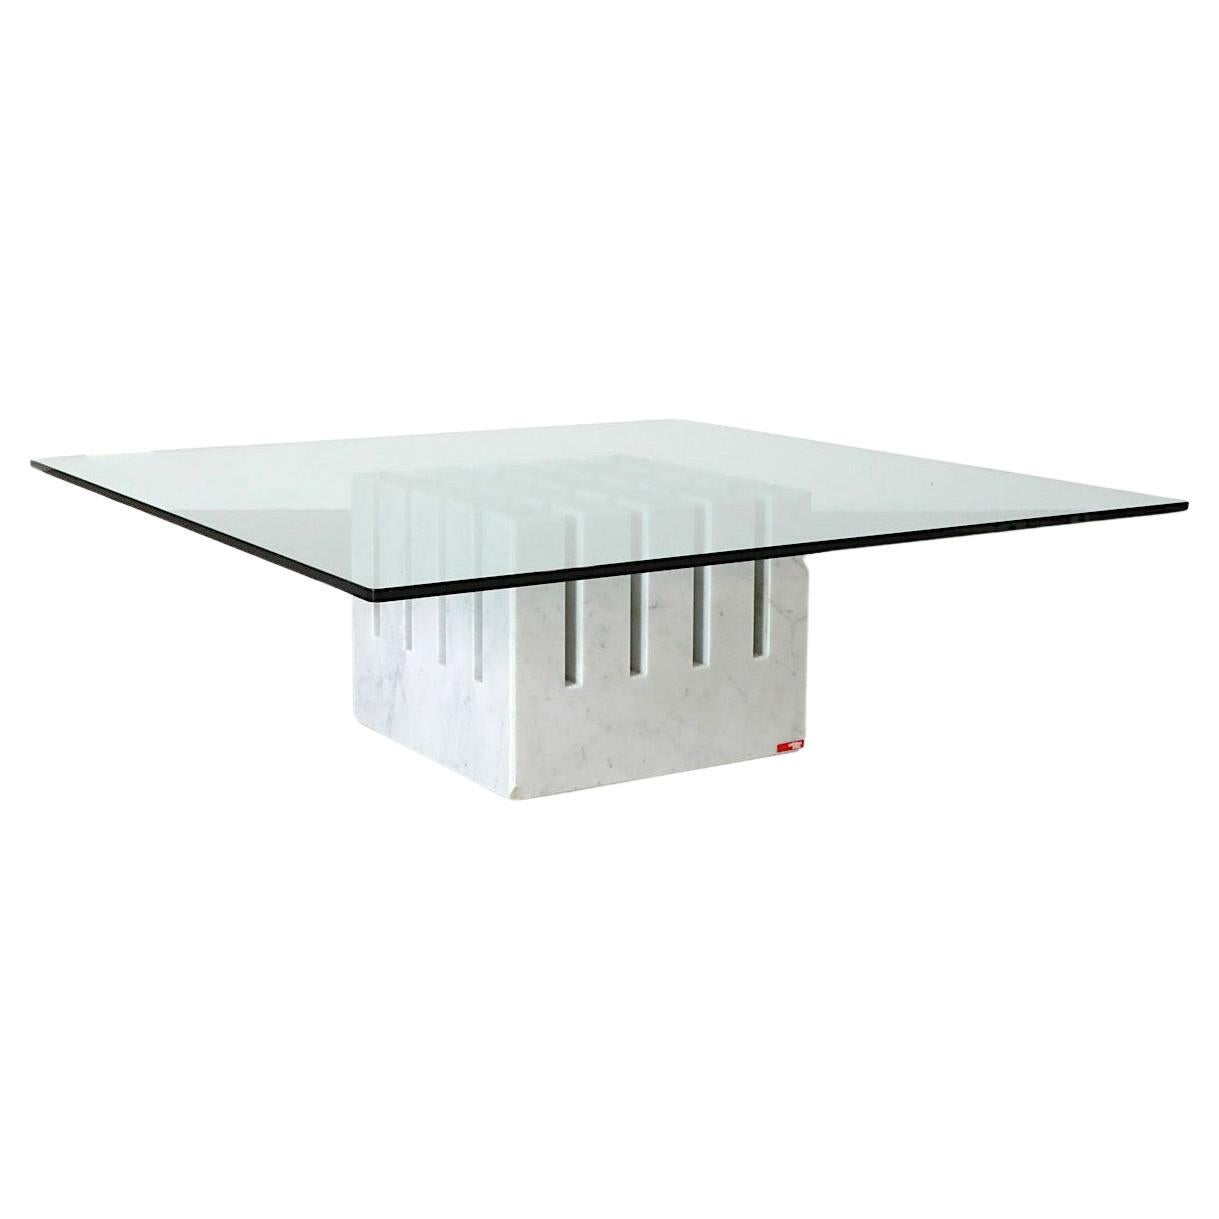 Marble ‘Scacco’ Coffee Table with Glass Top by Cattelan Italia, 1986 For Sale